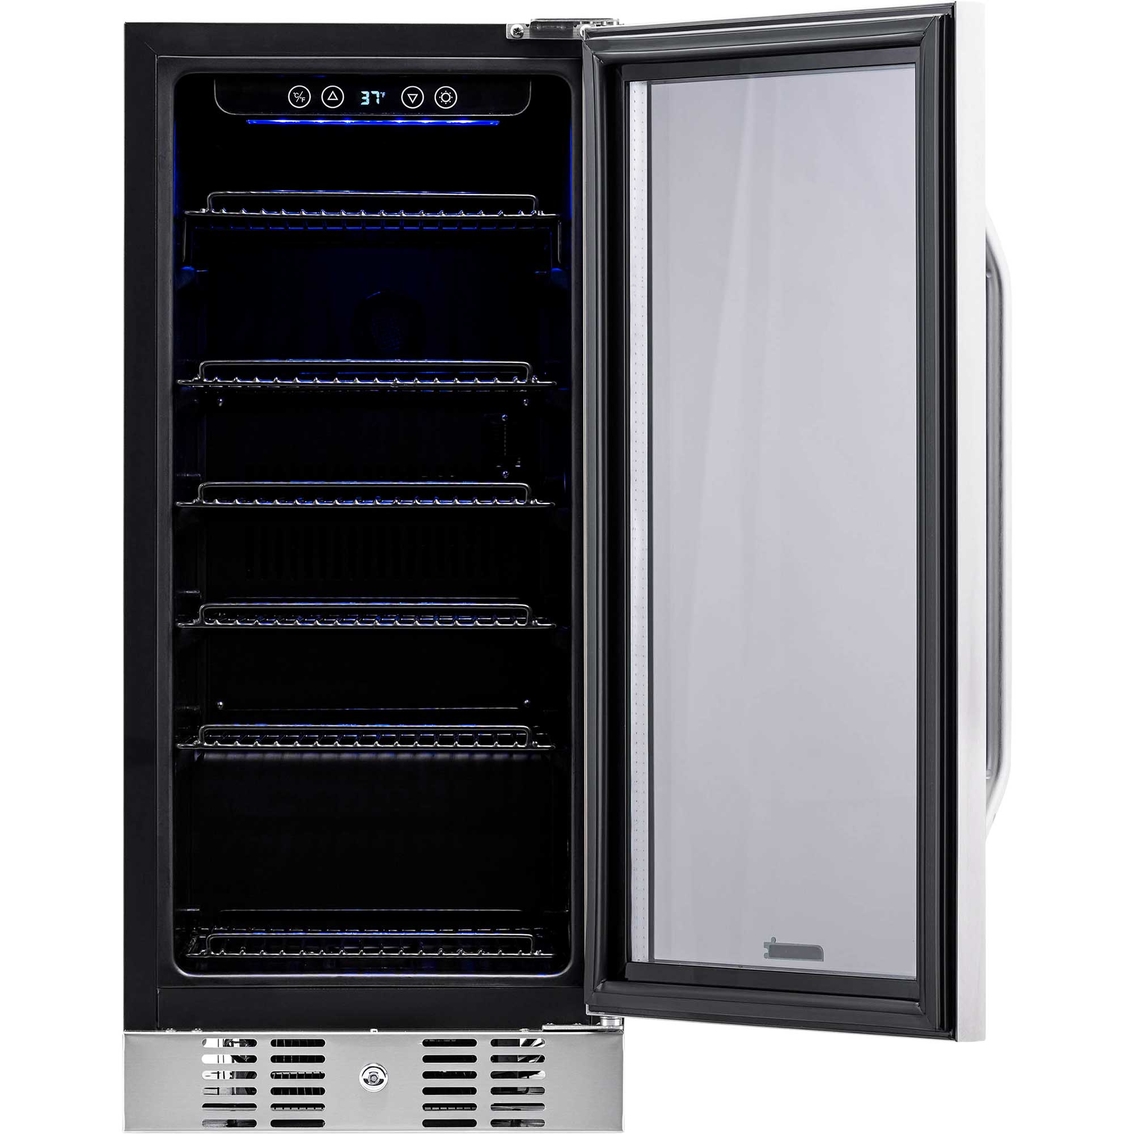 NewAir 15 in. 96 Can Beverage Cooler - Image 4 of 10